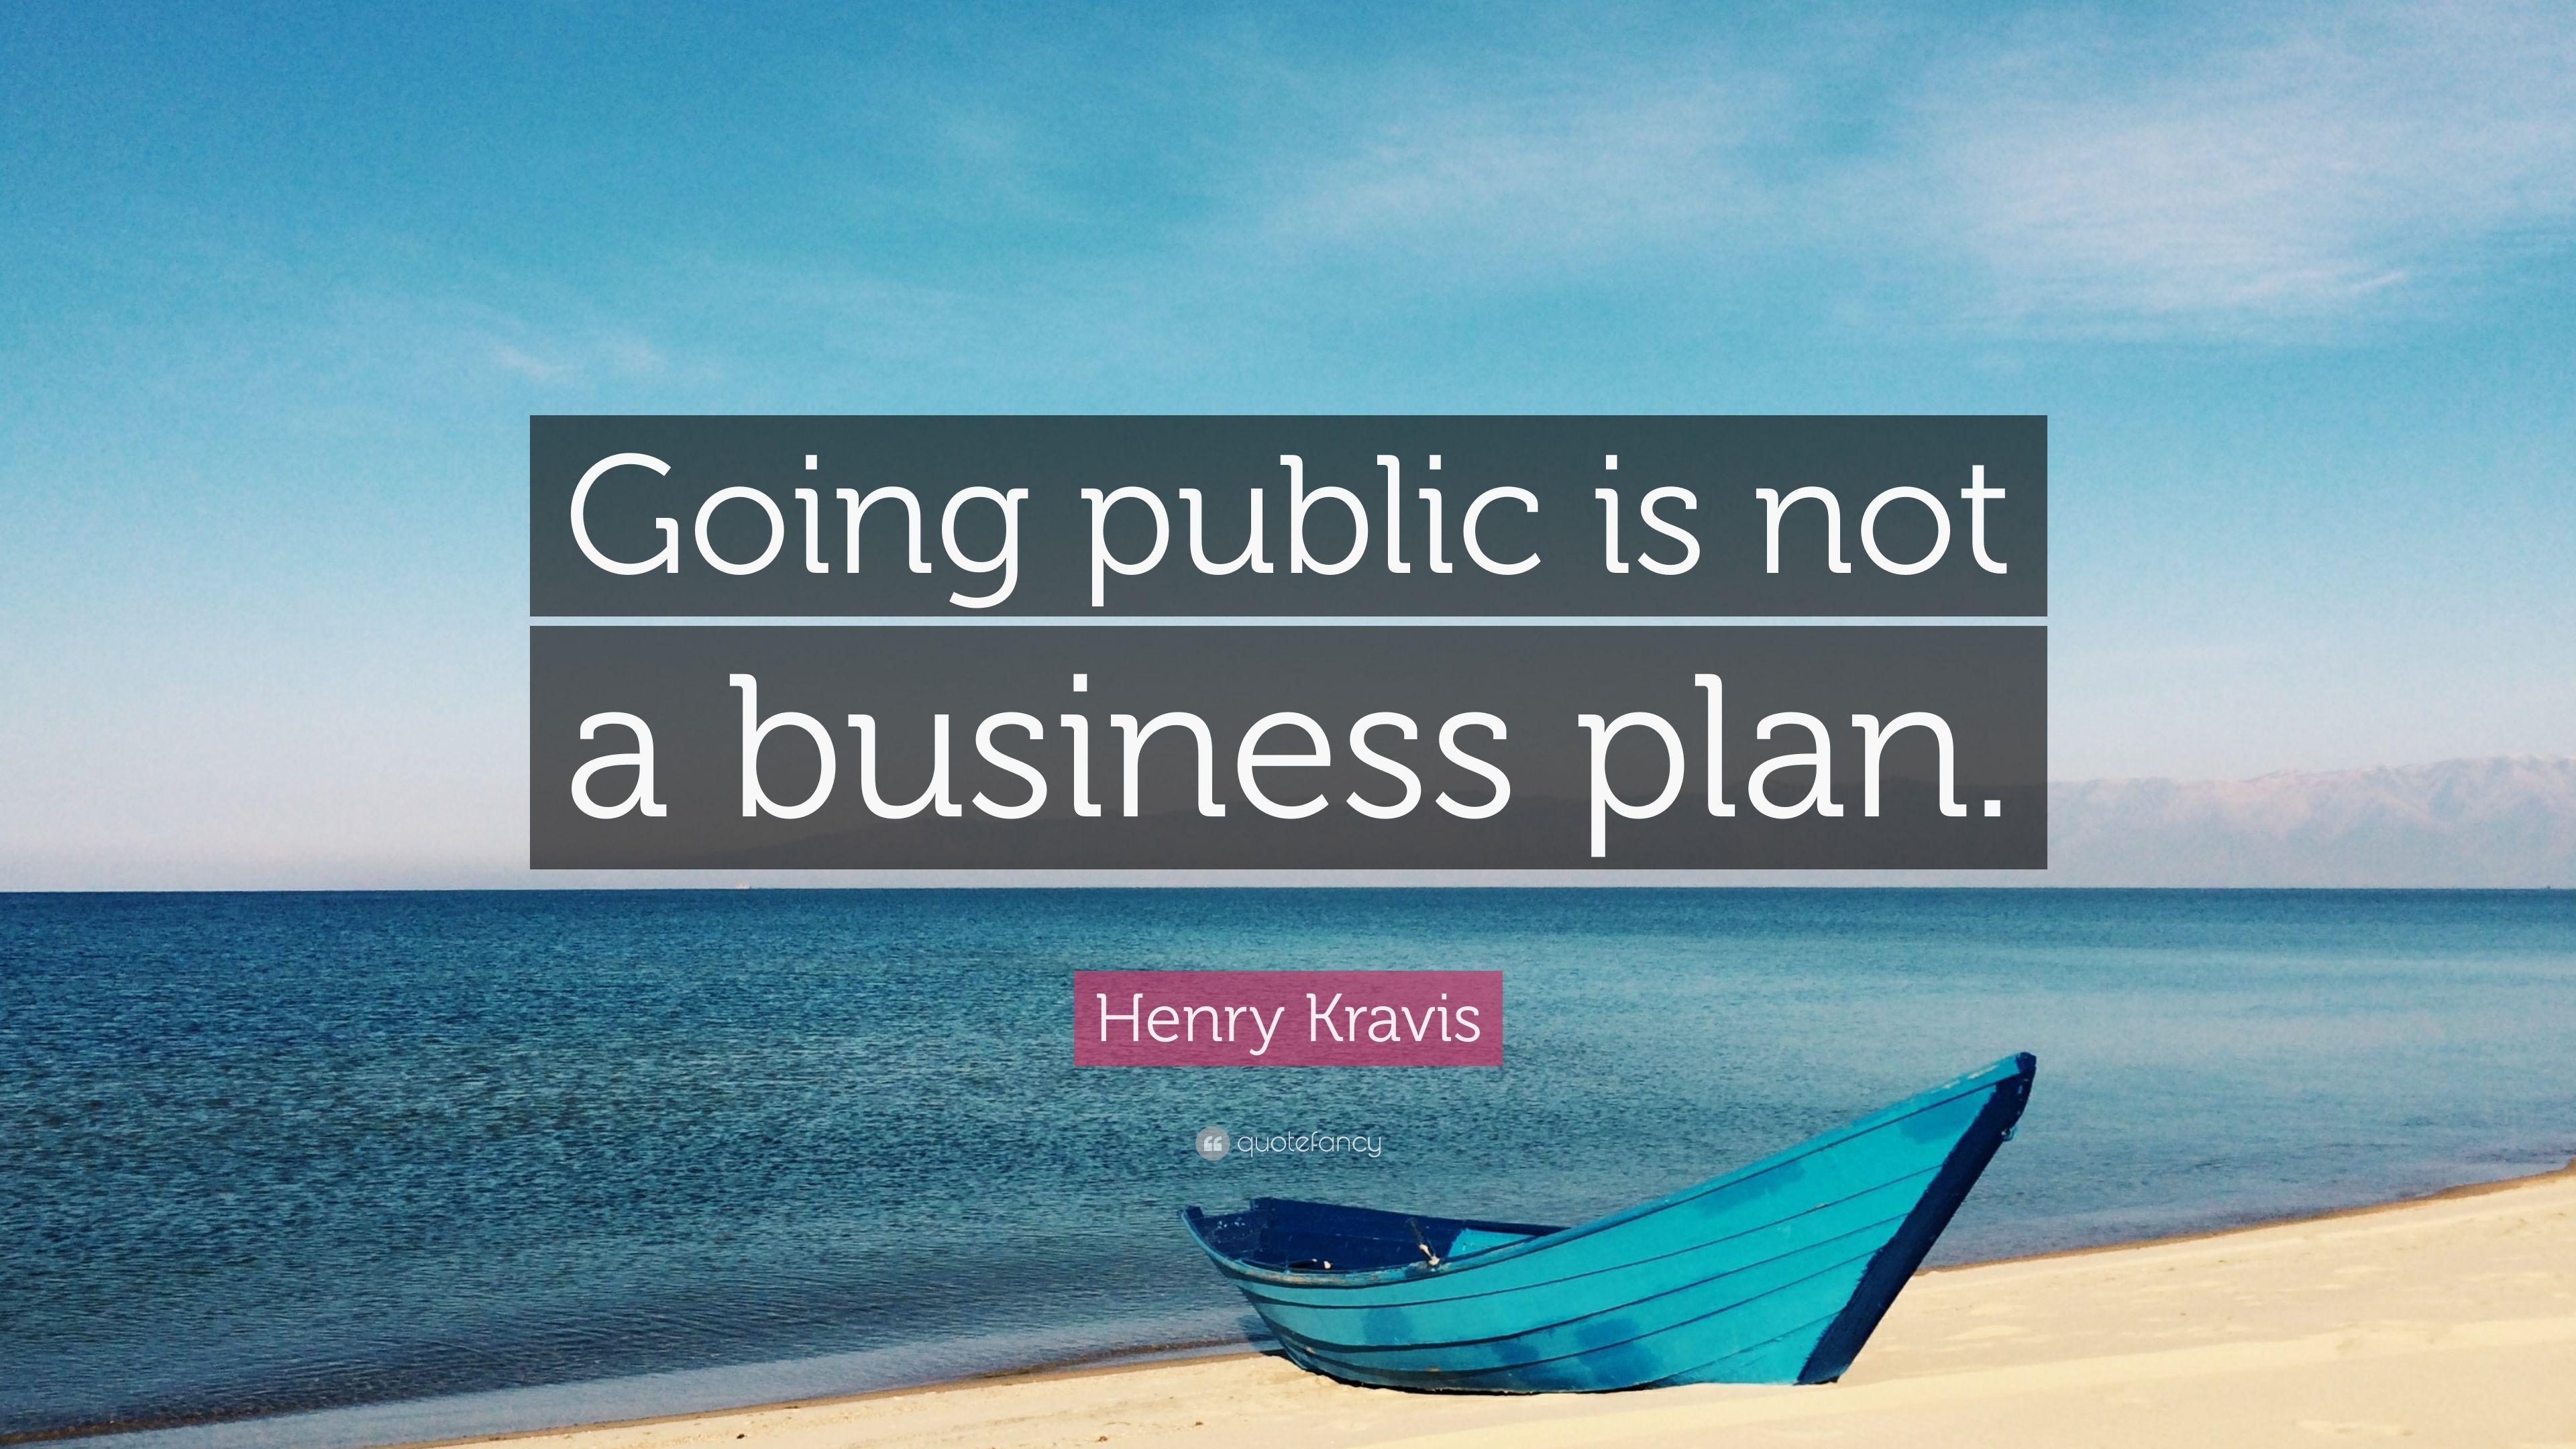 is not a business plan